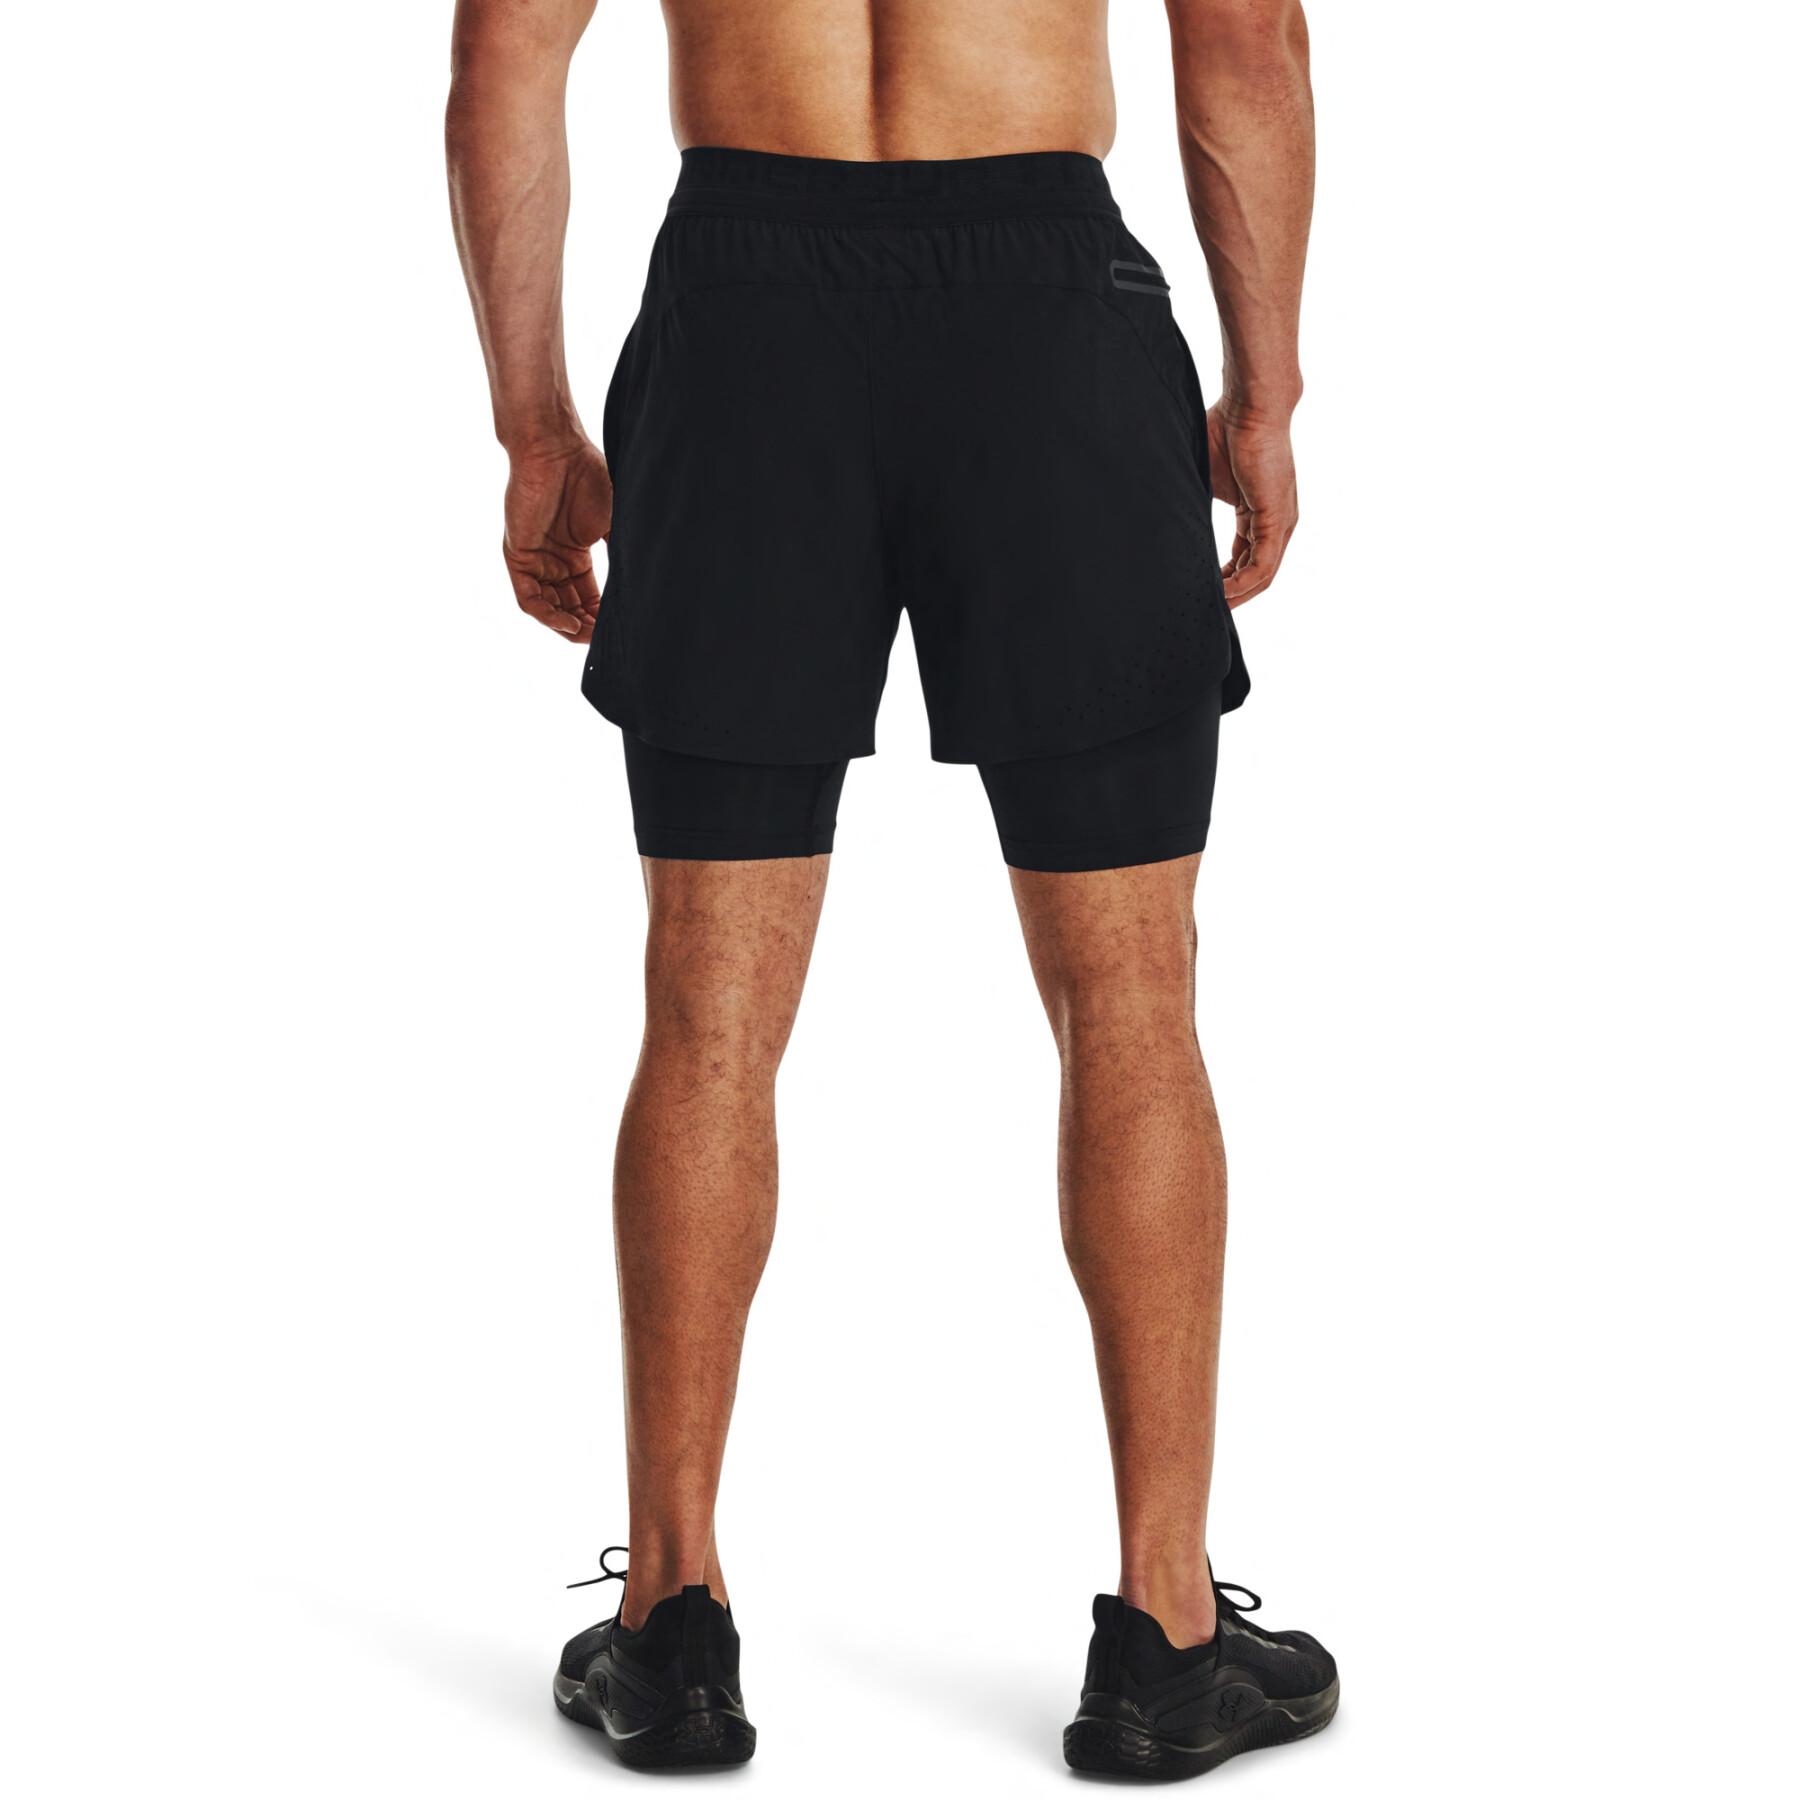 2-in-1 woven shorts Under Armour Peak